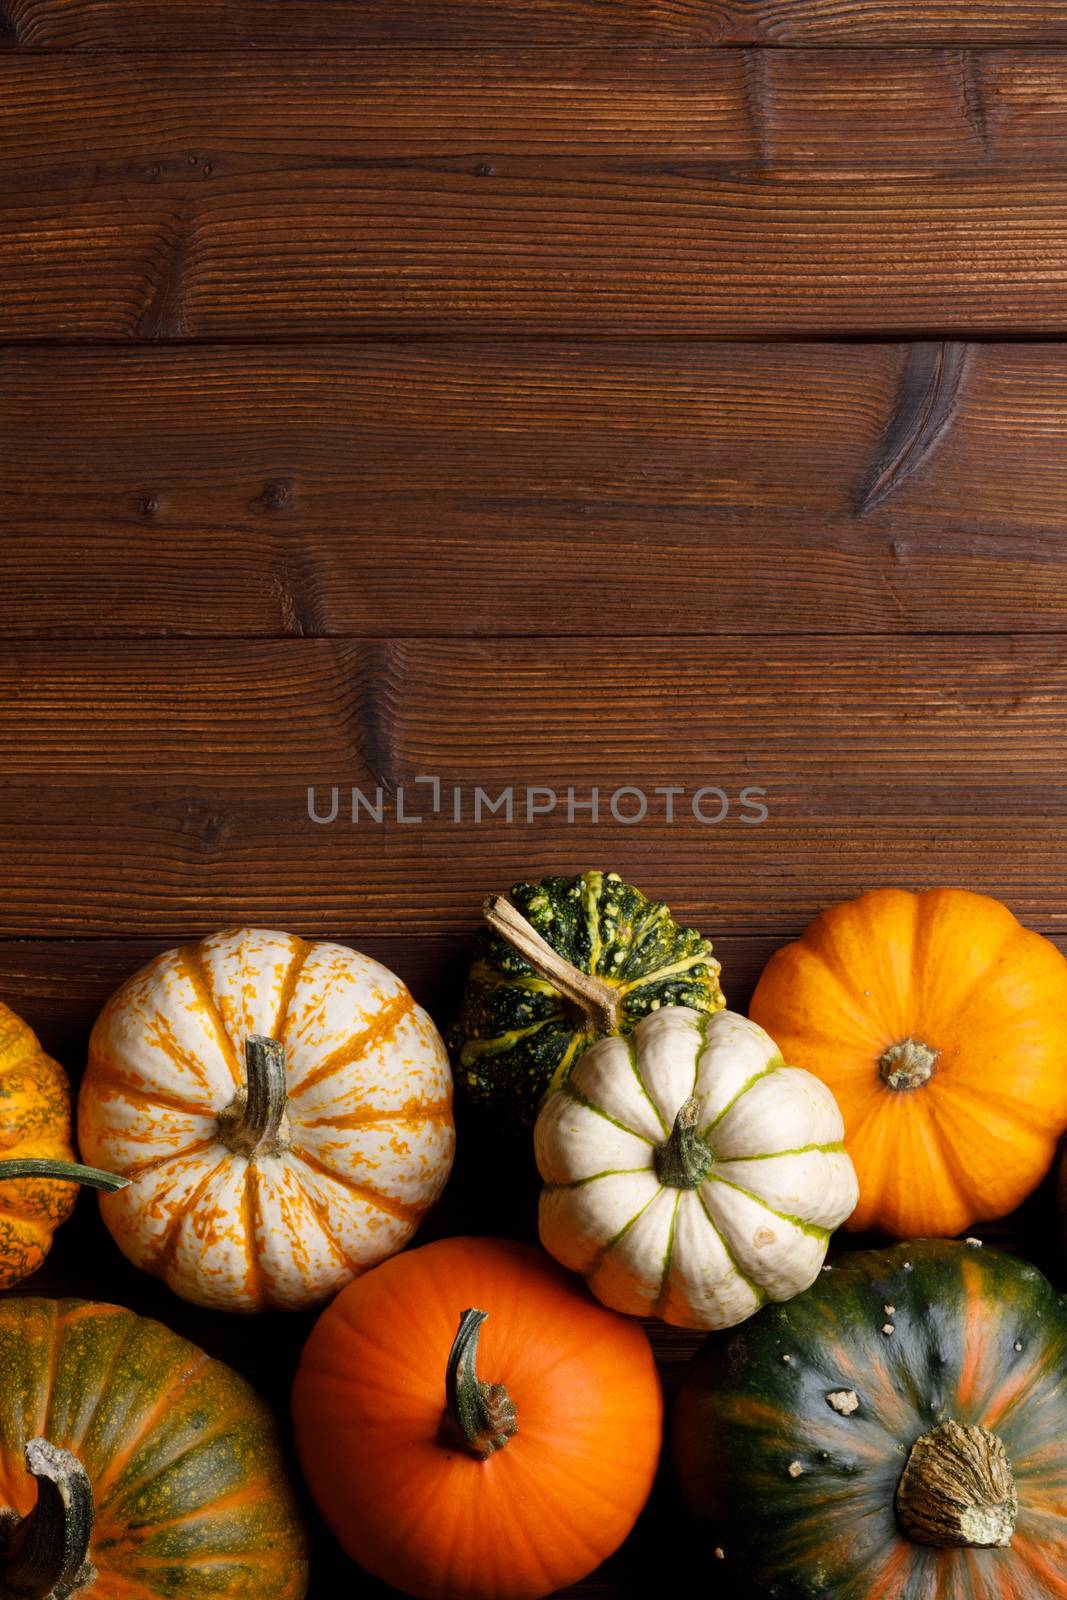 Many orange pumpkins on dark wooden background, Halloween concept, top view with copy space